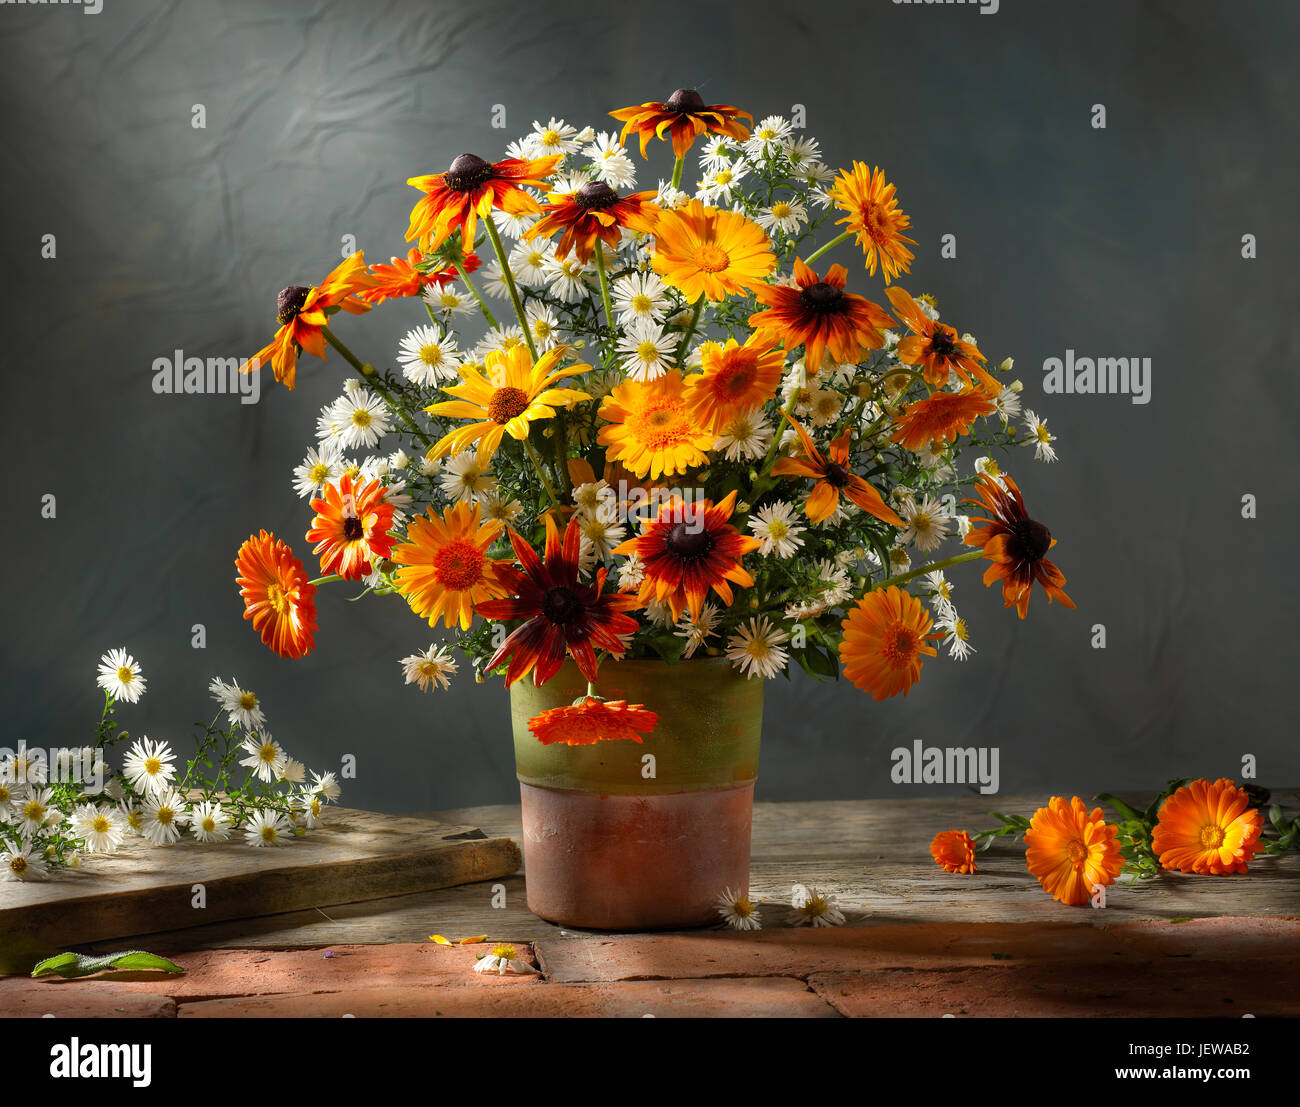 Bouquet of flowers with sunflower and daisies. Stock Photo